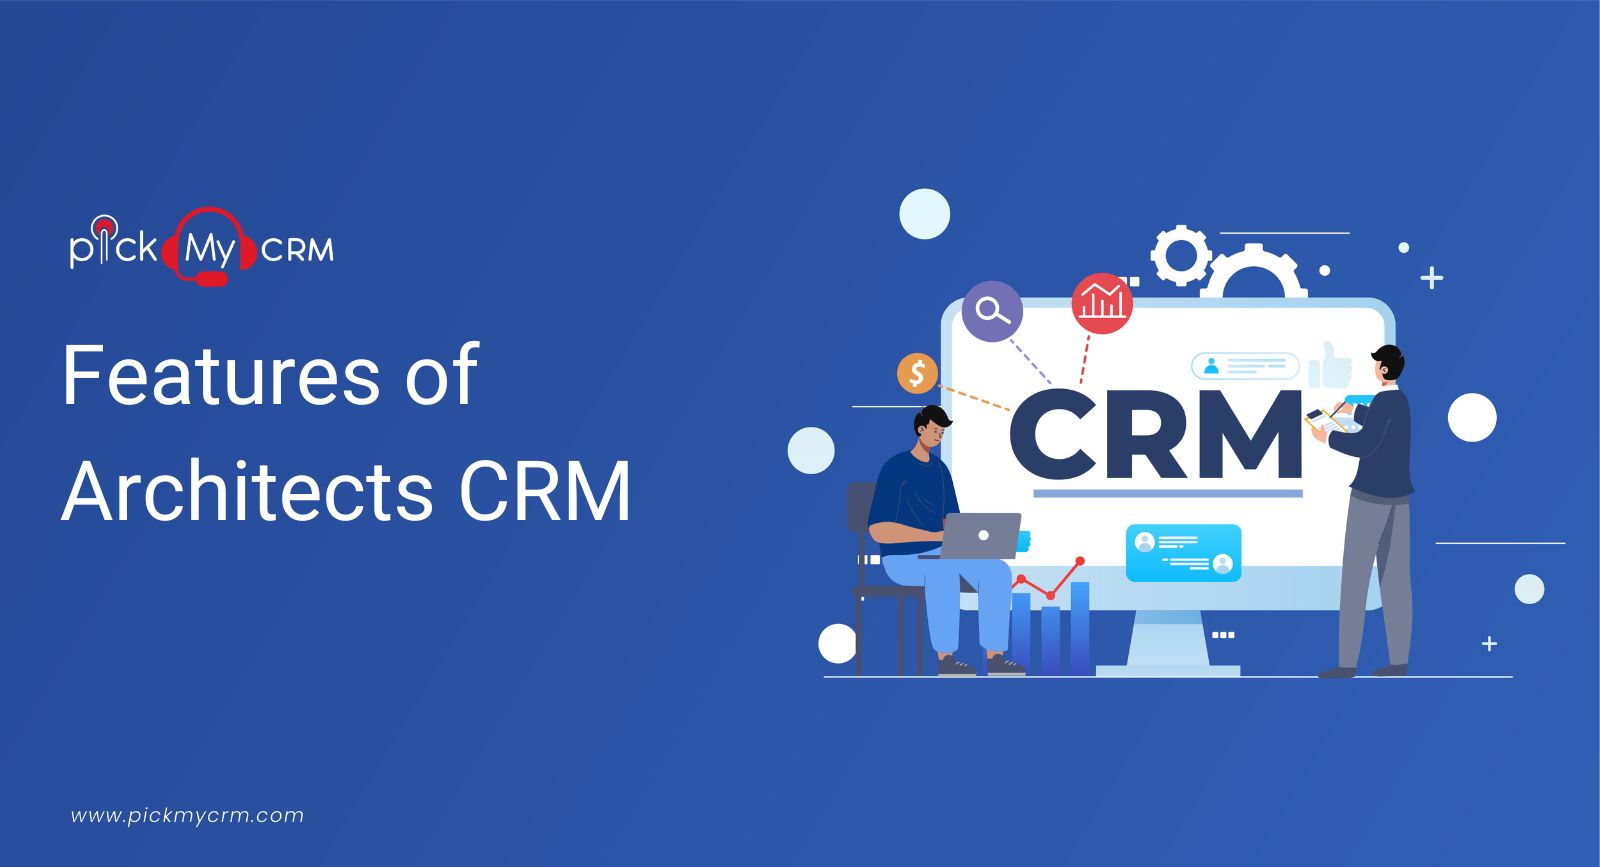 Features of Architects CRM